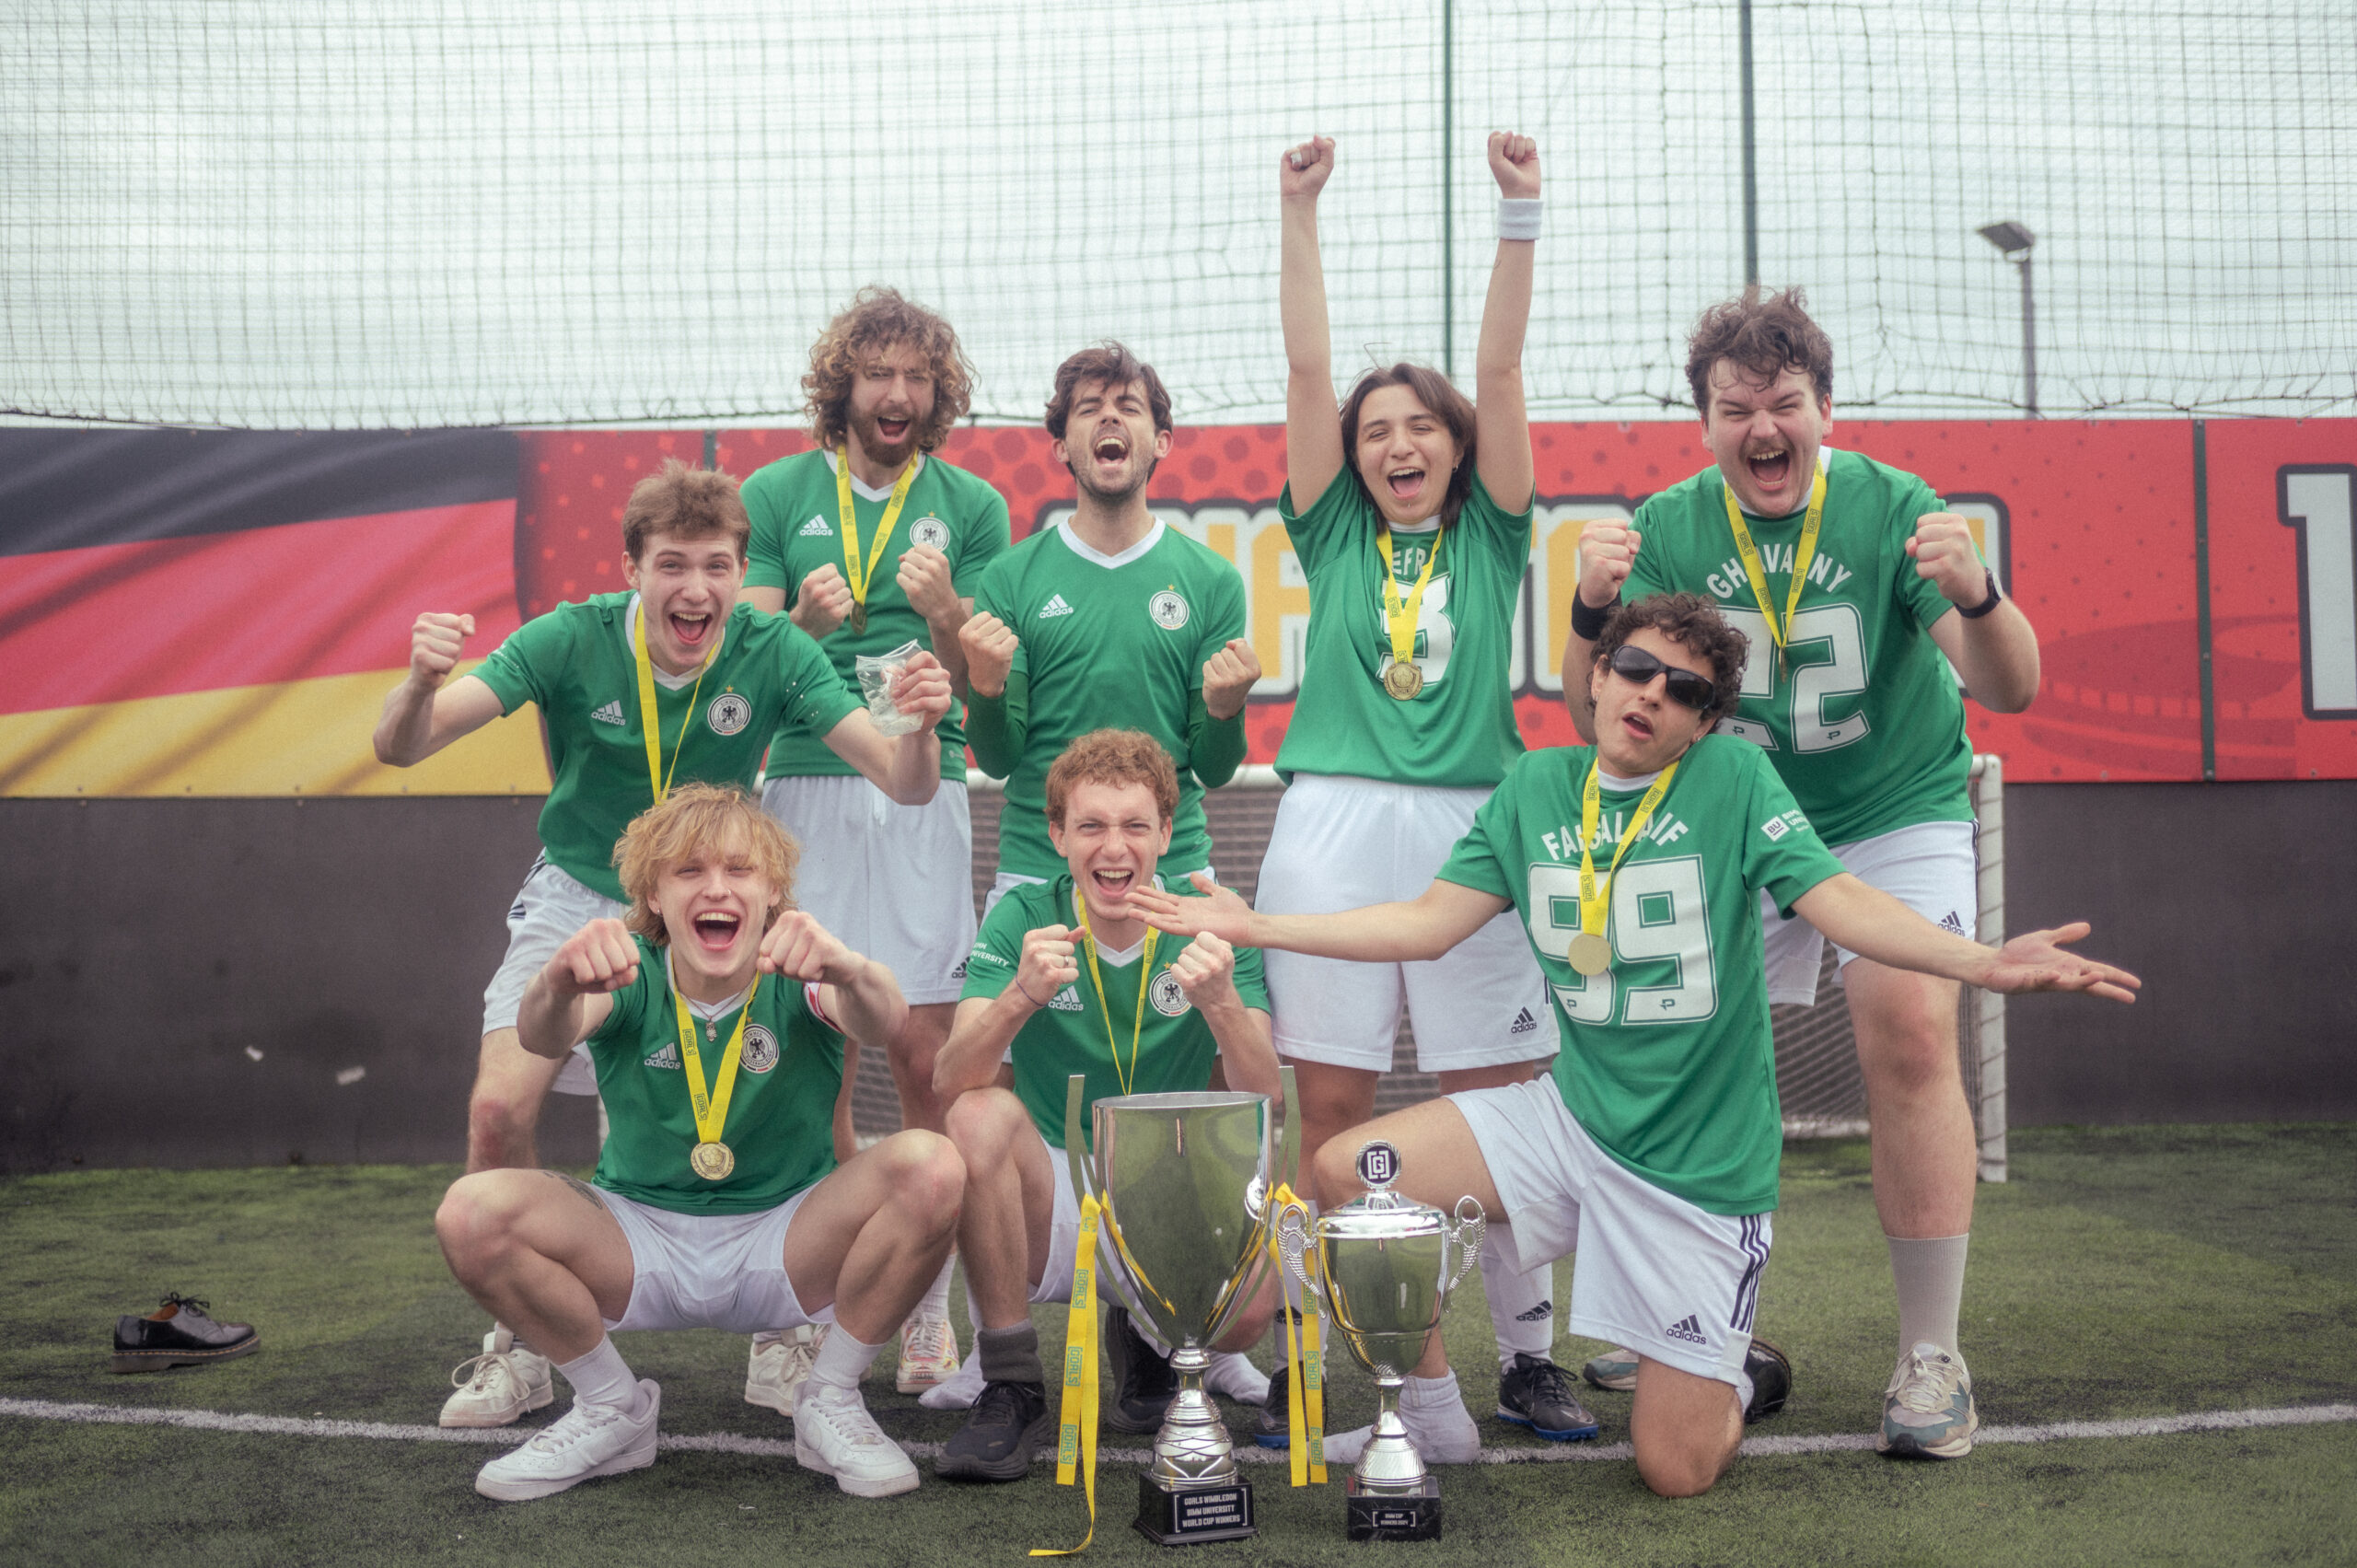 Group photo of the winning BIMM World Cup team from BIMM University Berlin. The team are in celebratory poses and their two trophies are in view.